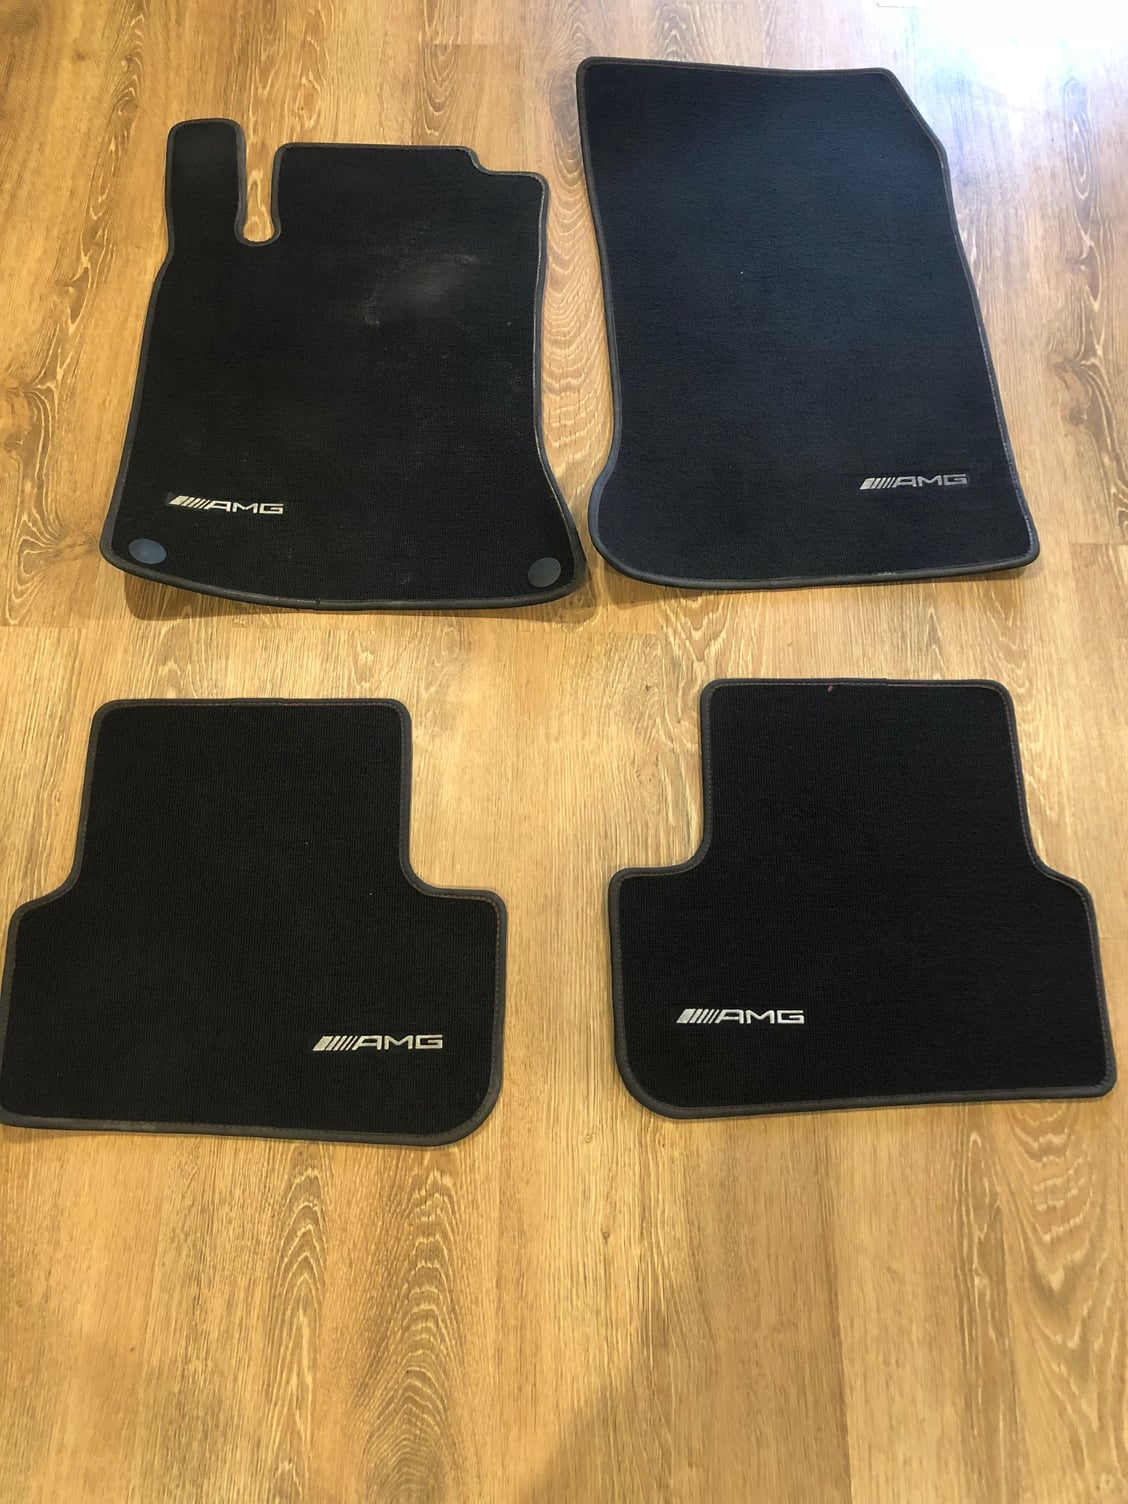 Interior/Upholstery - Oem A/CLA 14-18 floor mats W/red stitching - Used - Boston, MA 02452, United States